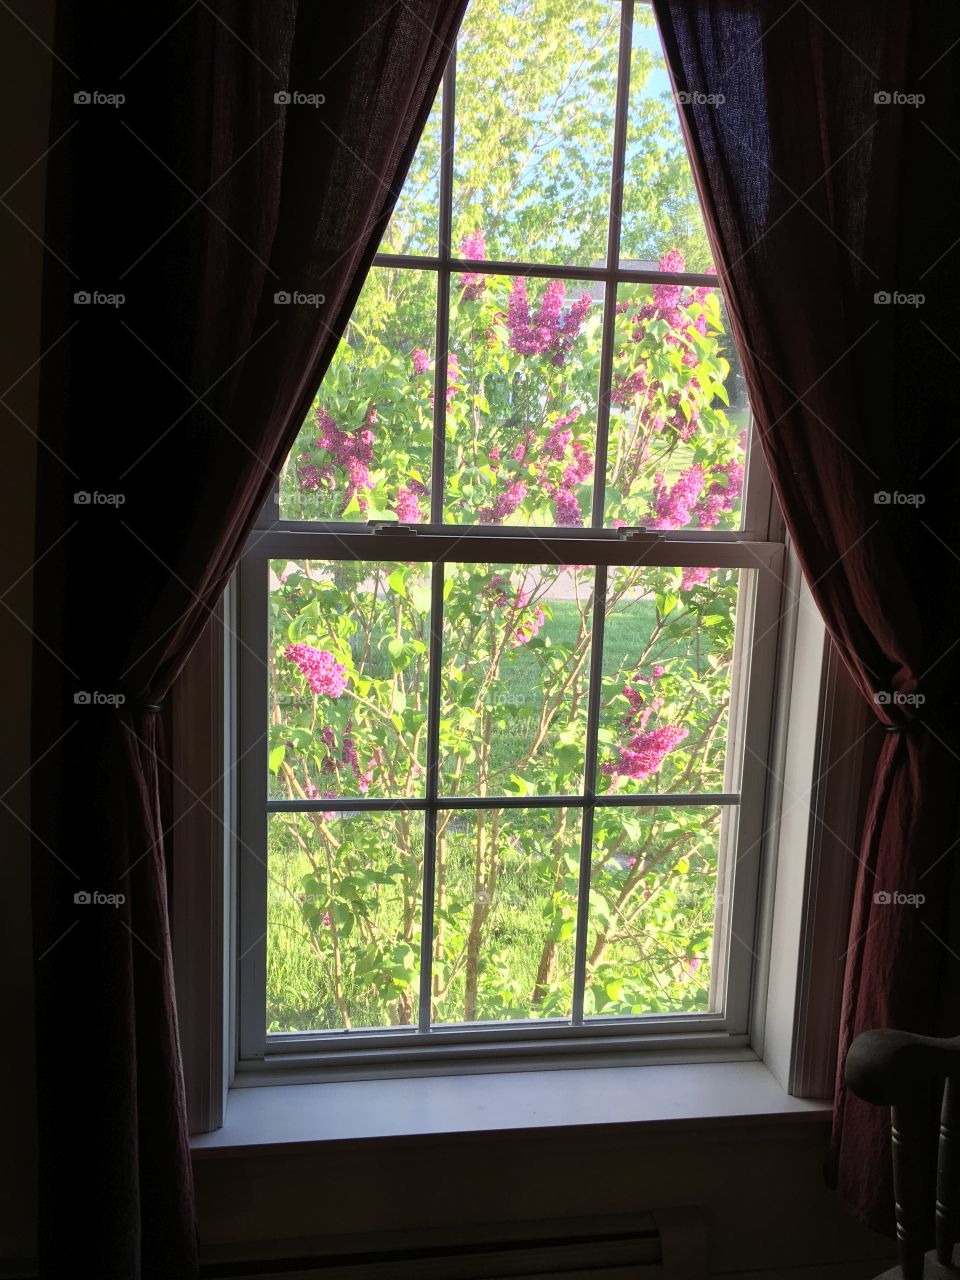 Looking out at my lilac tree 